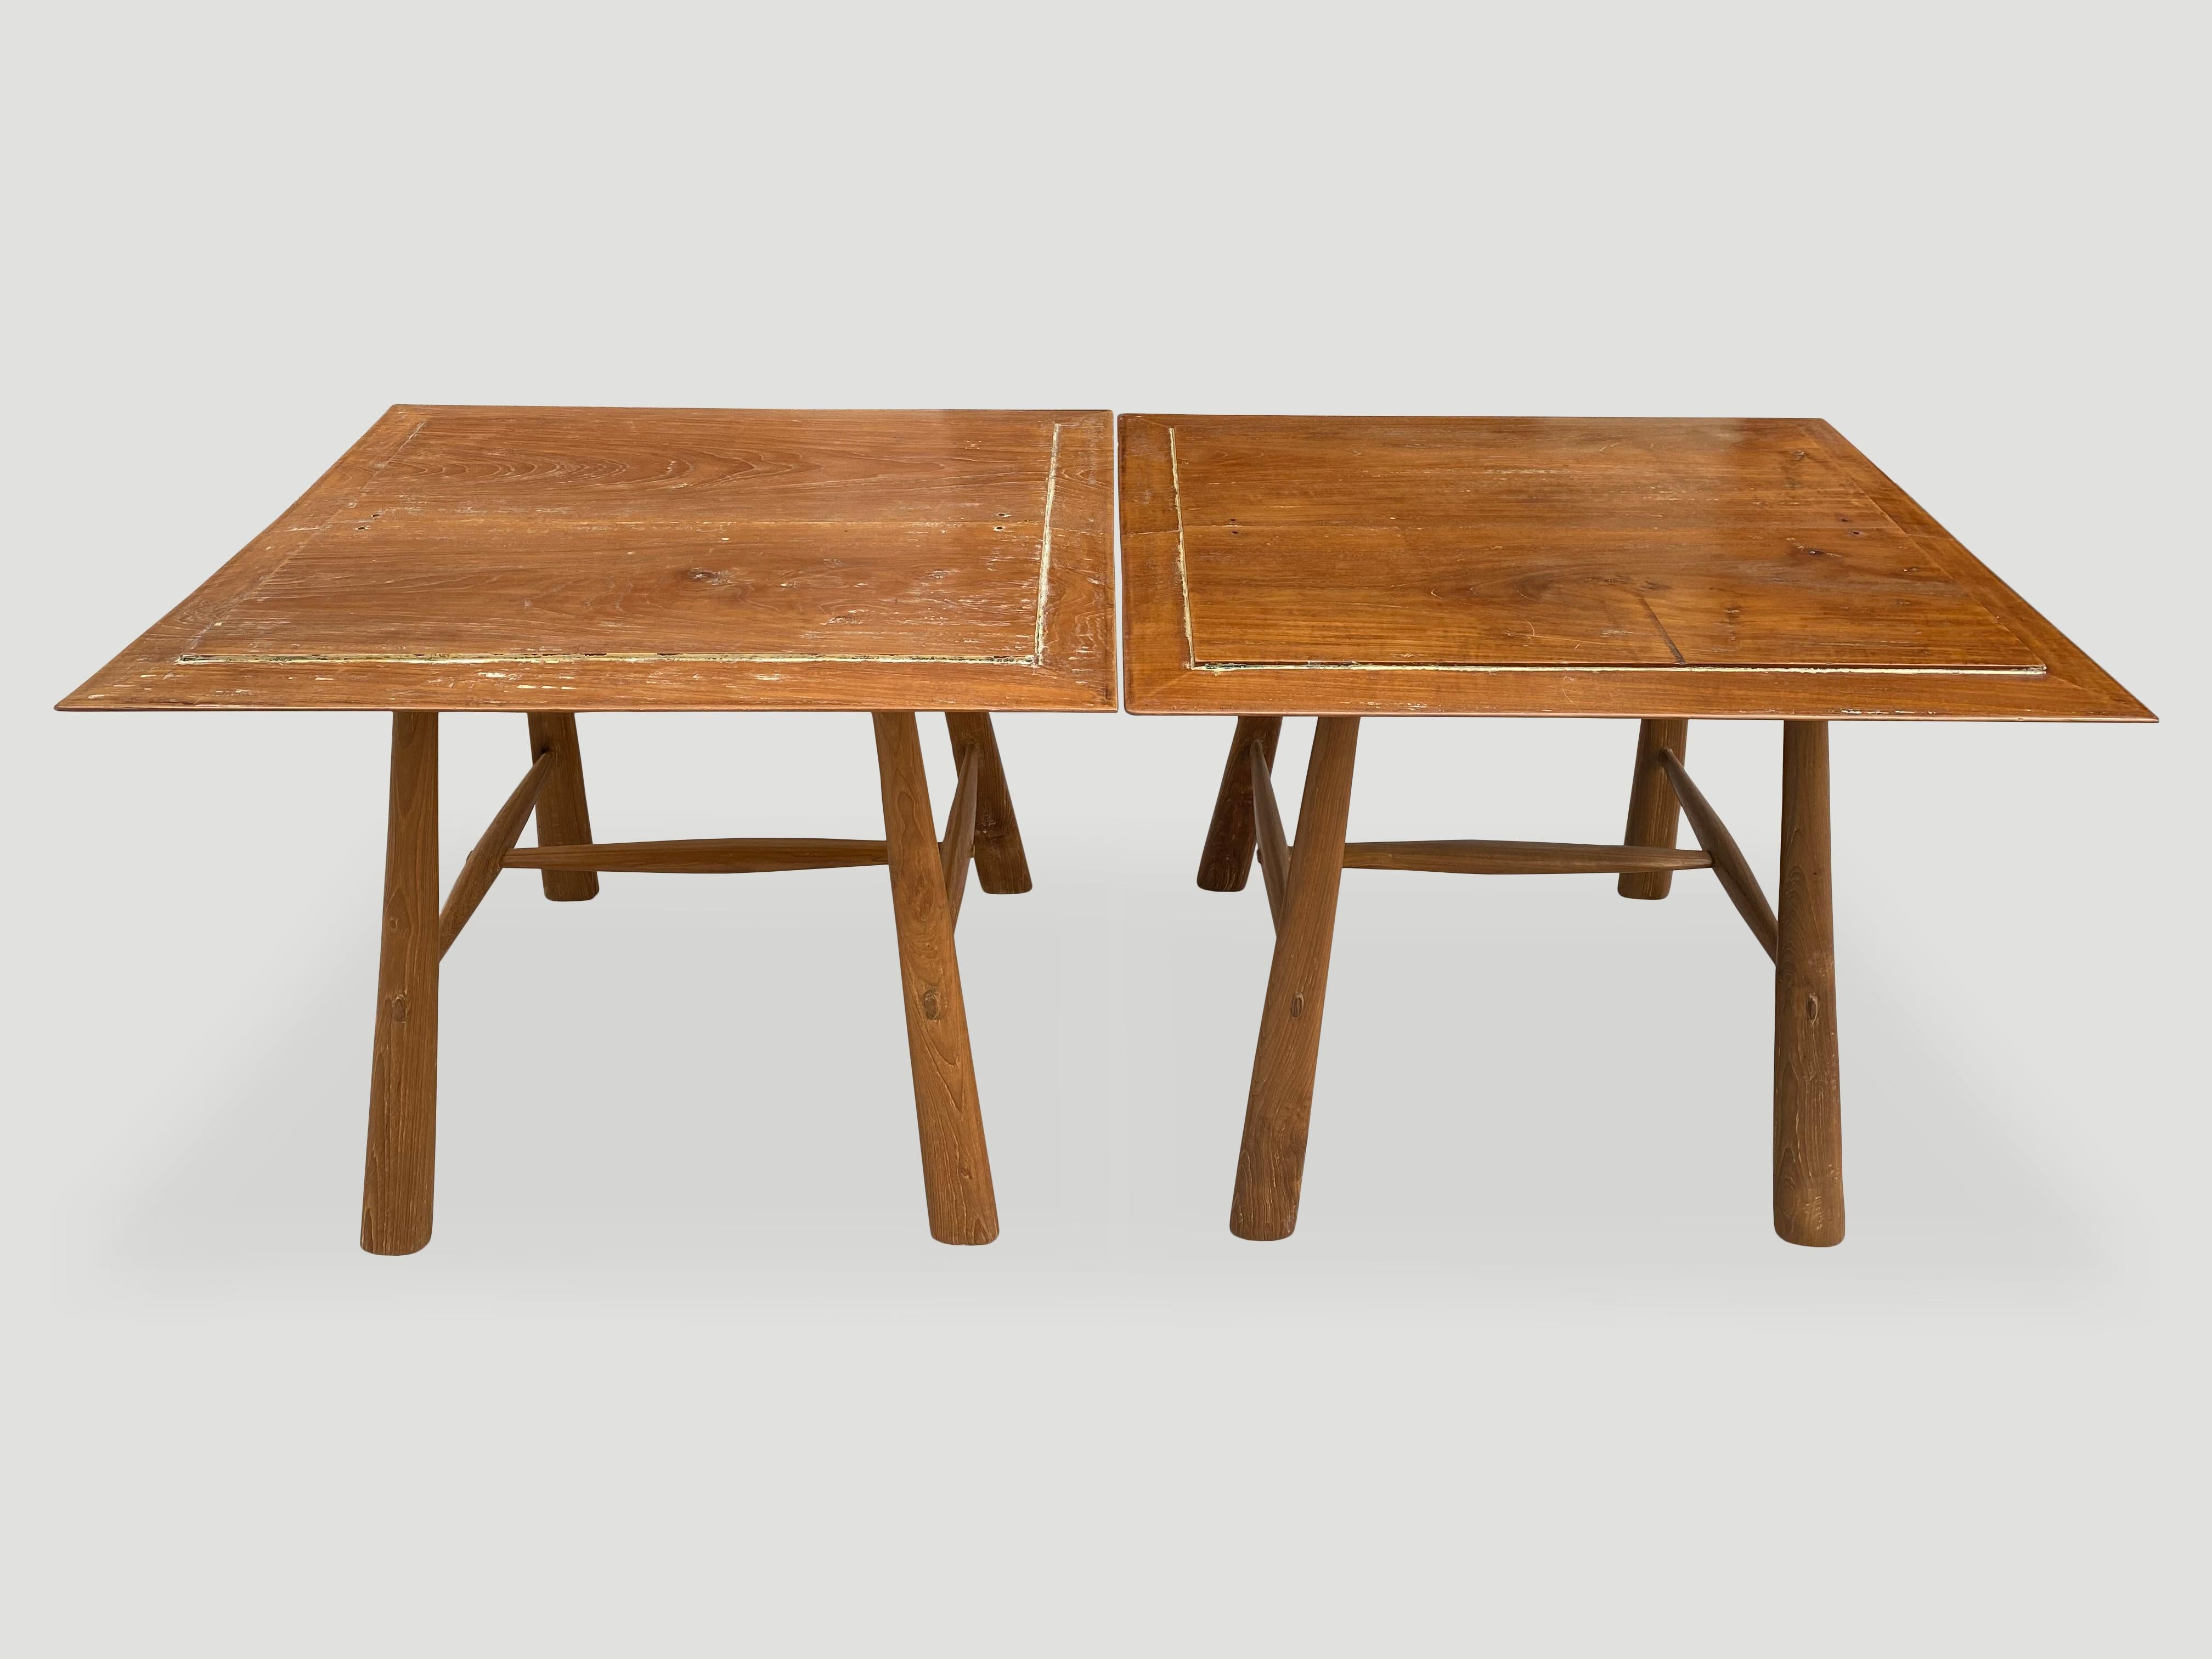 Andrianna Shamaris Midcentury Couture Teak Wood Cocktail Table or Entry Table For Sale 3